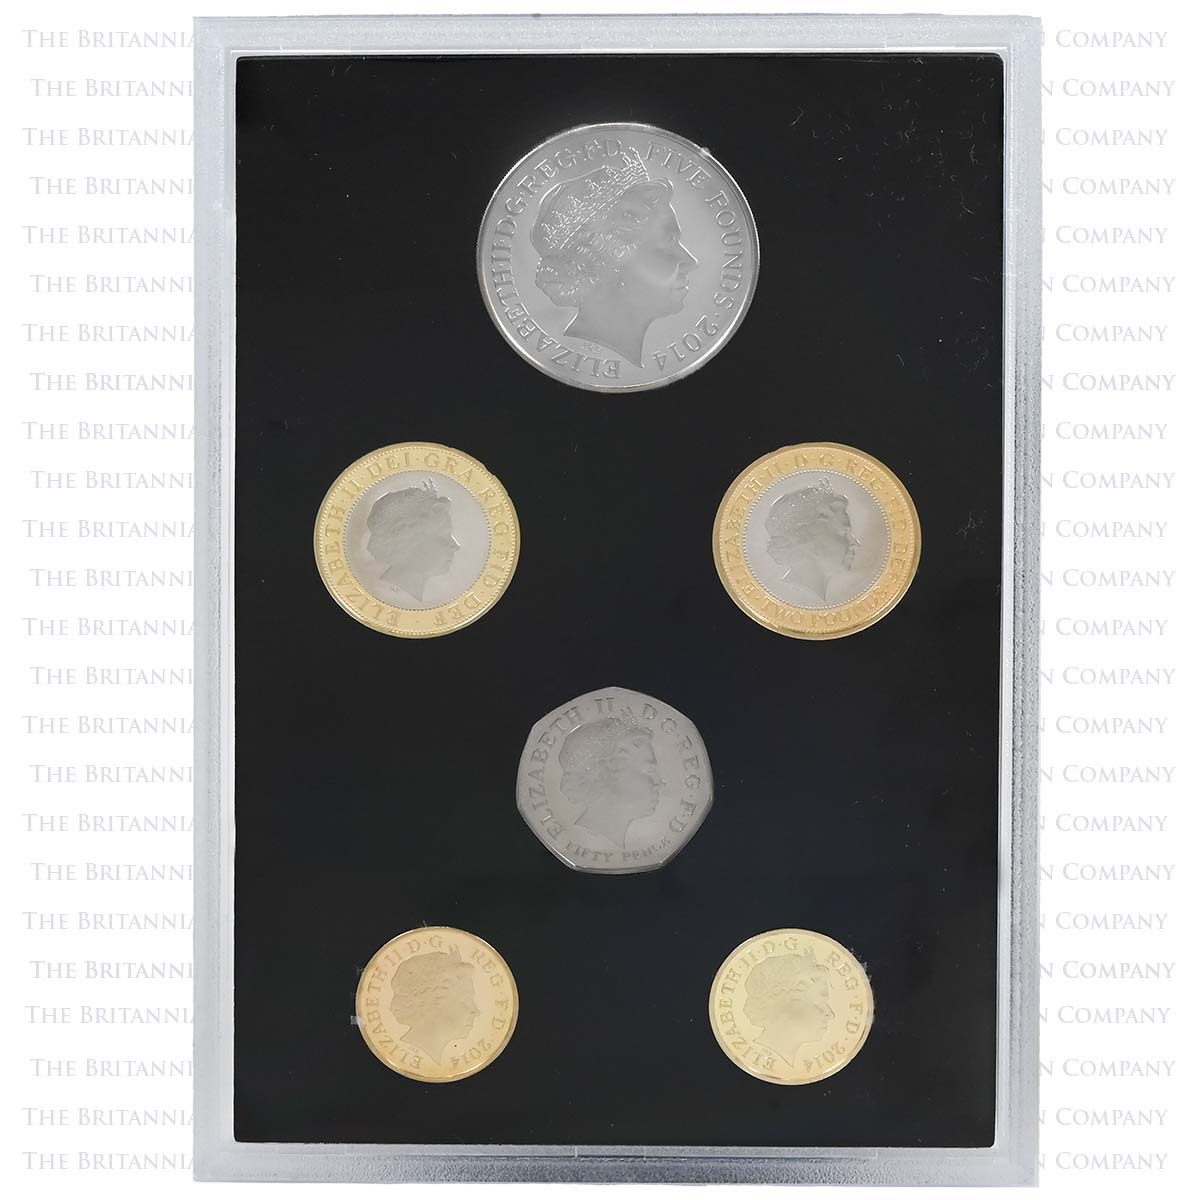 2014-proof-coin-set-collector-edtition.-005-m